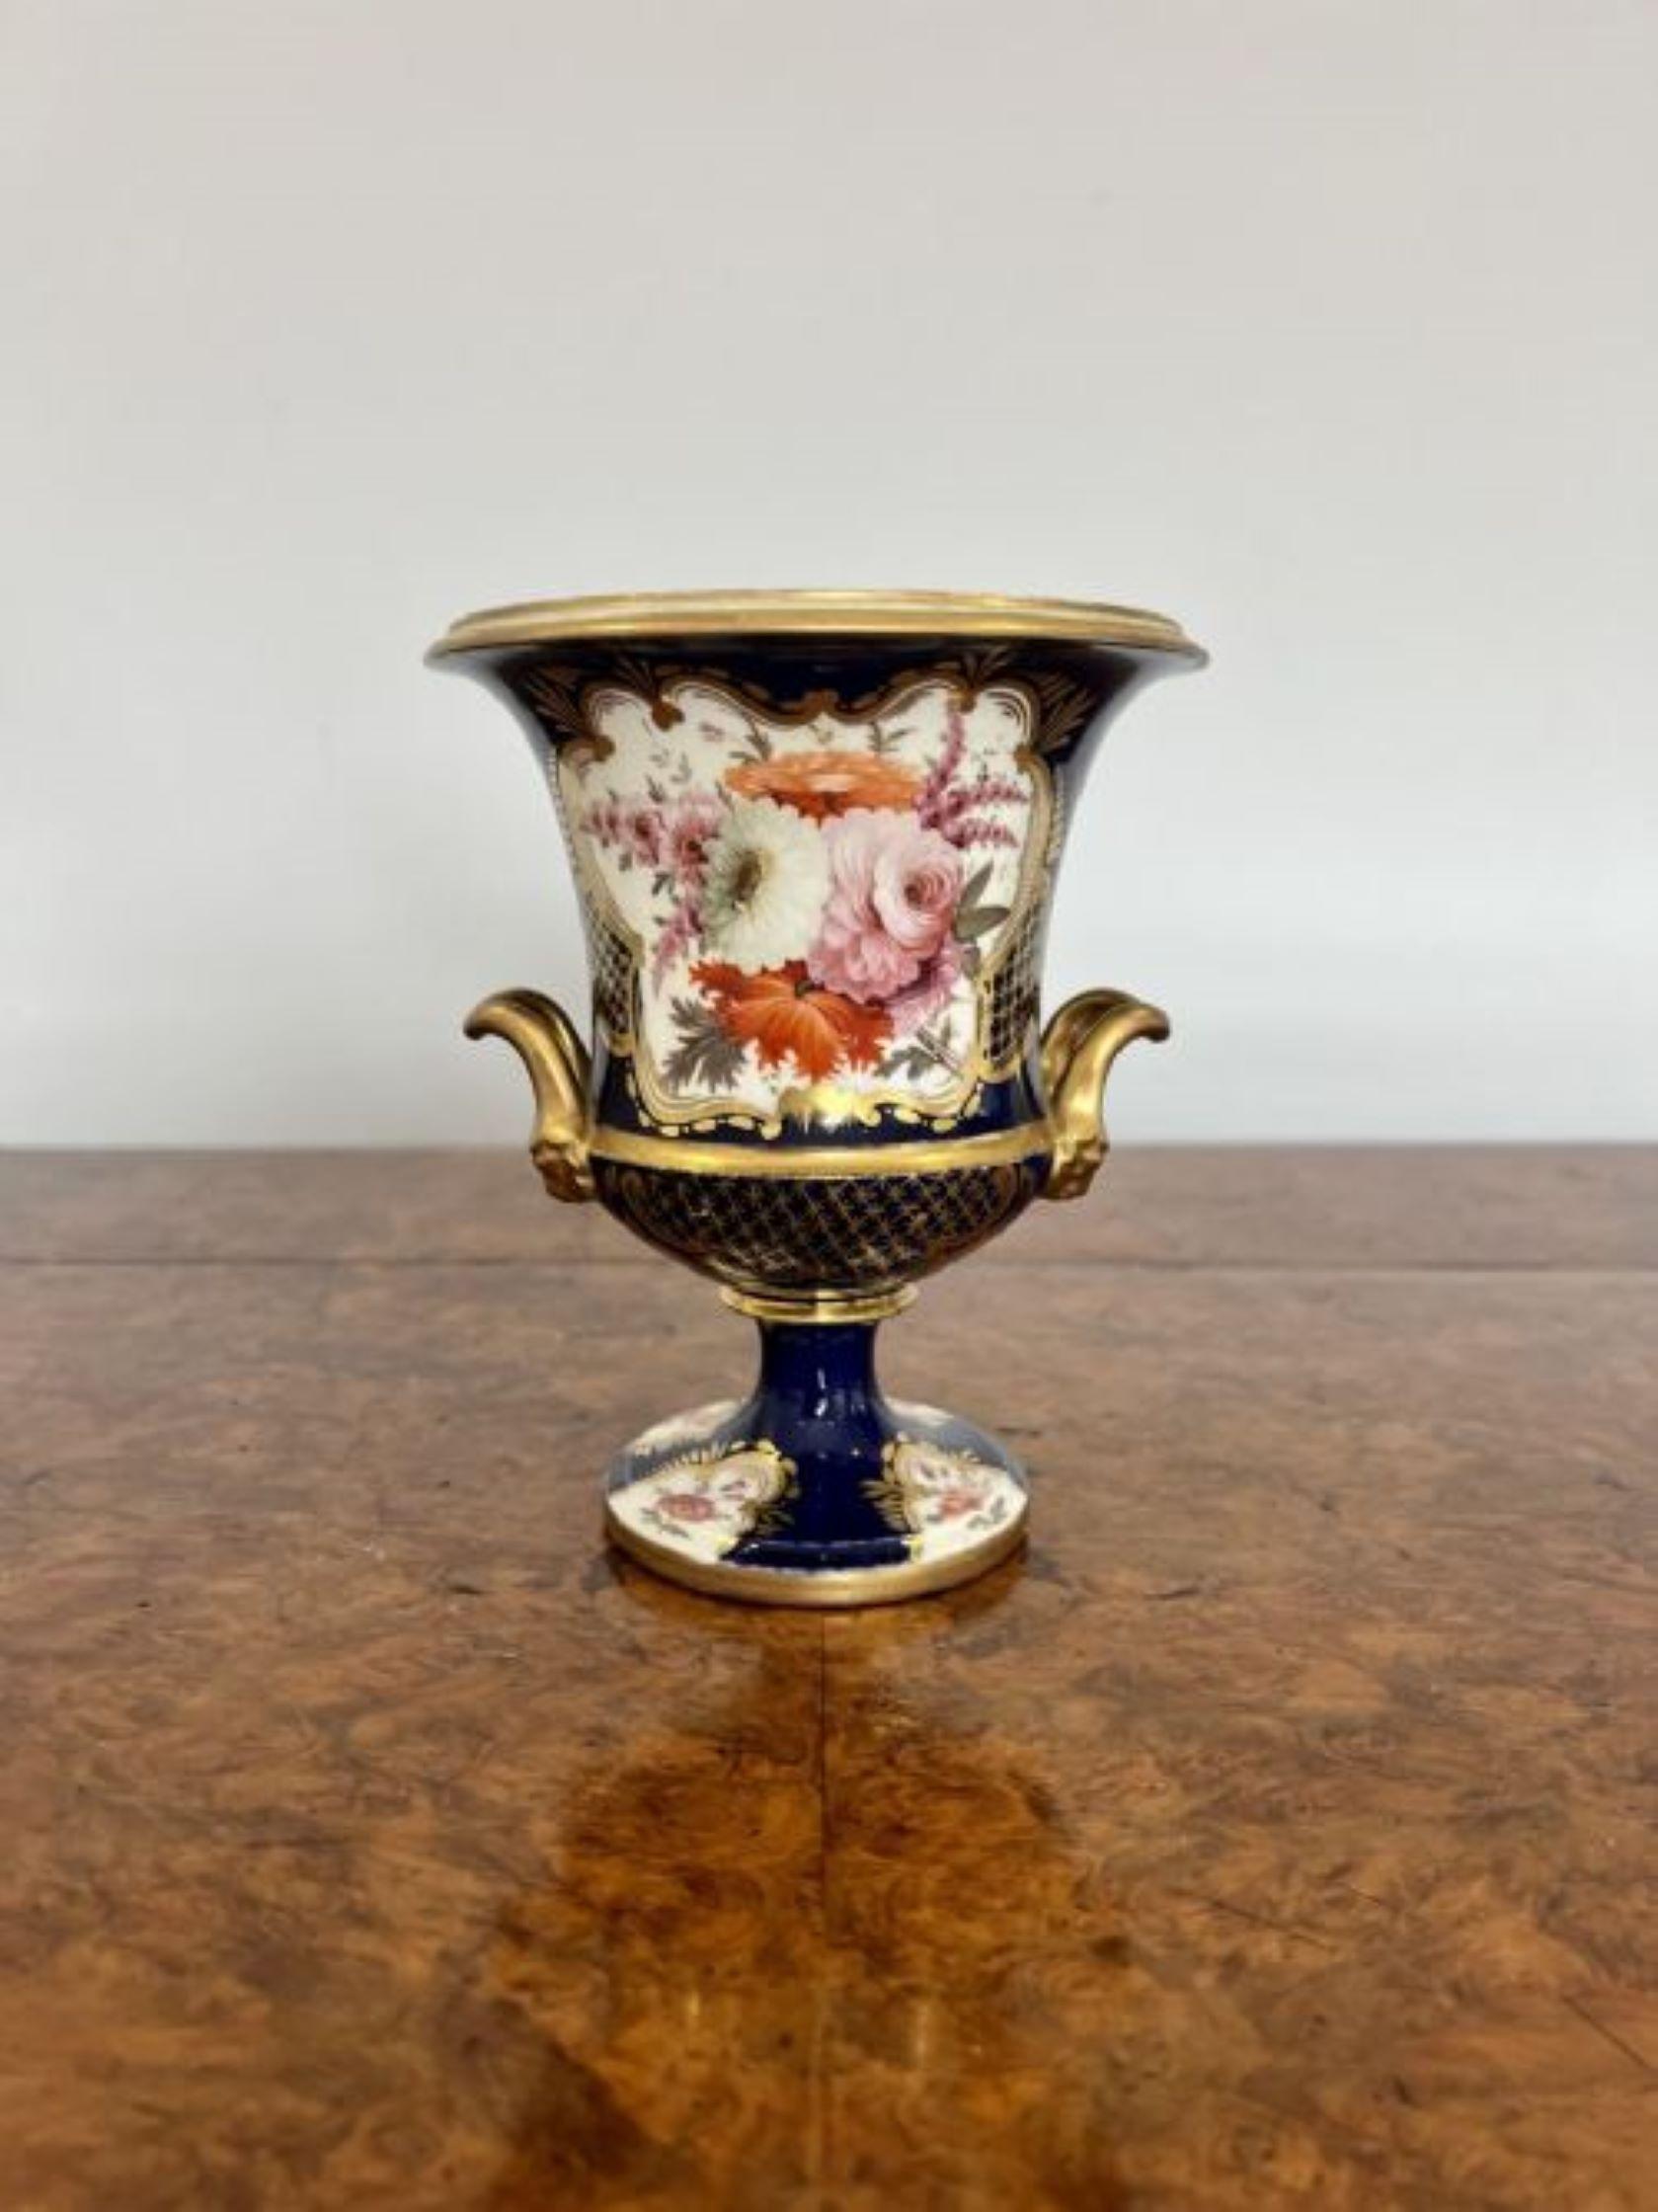 Fine quality early 19th Century Spode vase with outstanding quality gilded decoration, hand painted flowers in wonderful pink, red, white and orange colours on a blue background, having two carrying handles to the sides standing on a circular base.